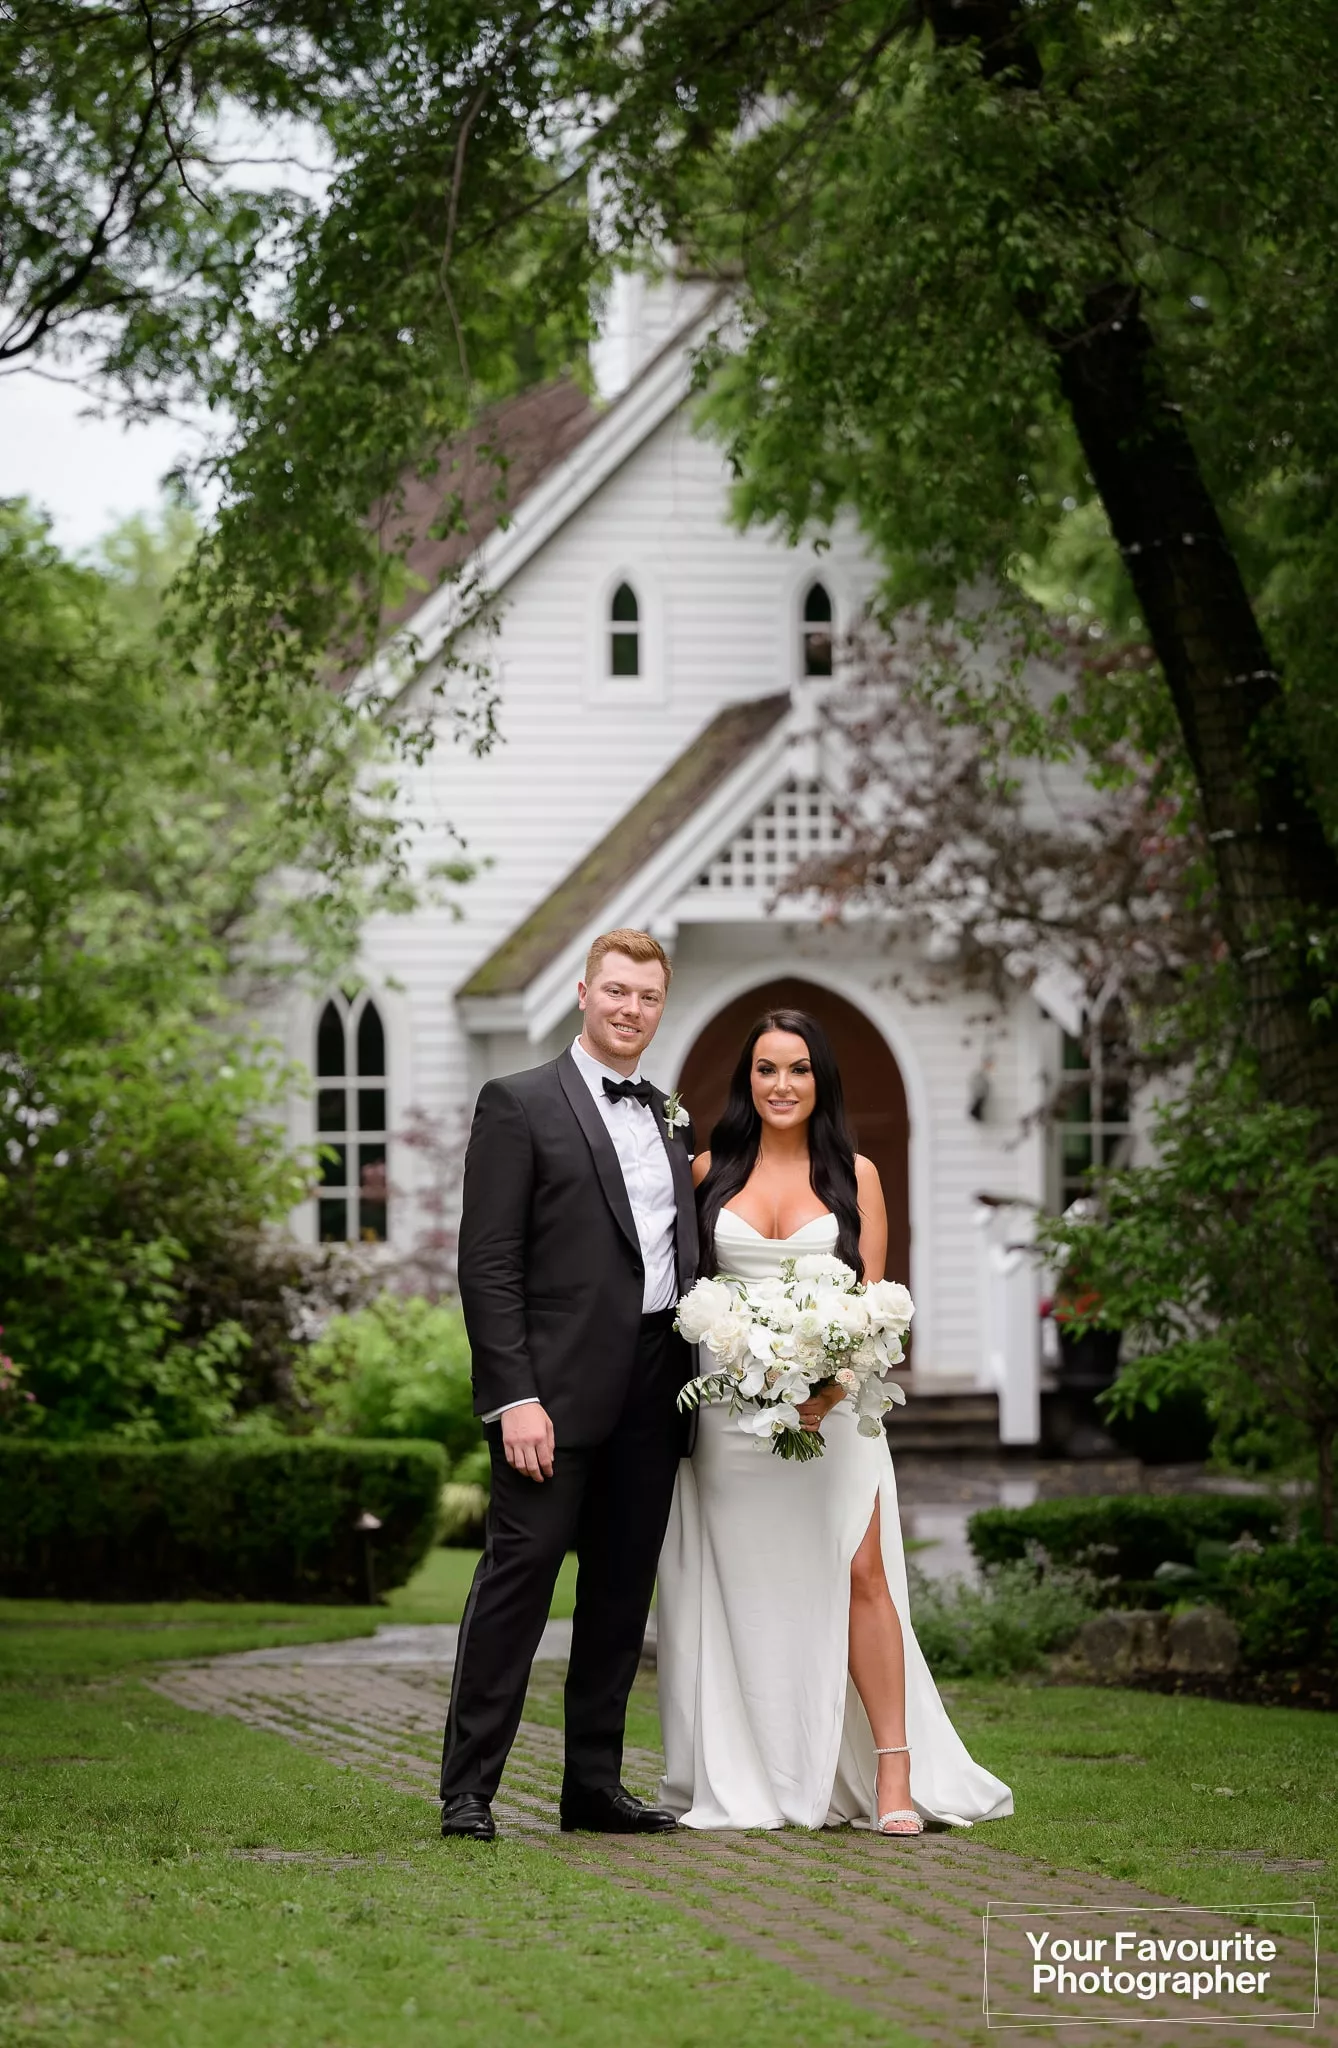 Samantha and Robert posing outside the chapel at The Doctor's House on their wedding day